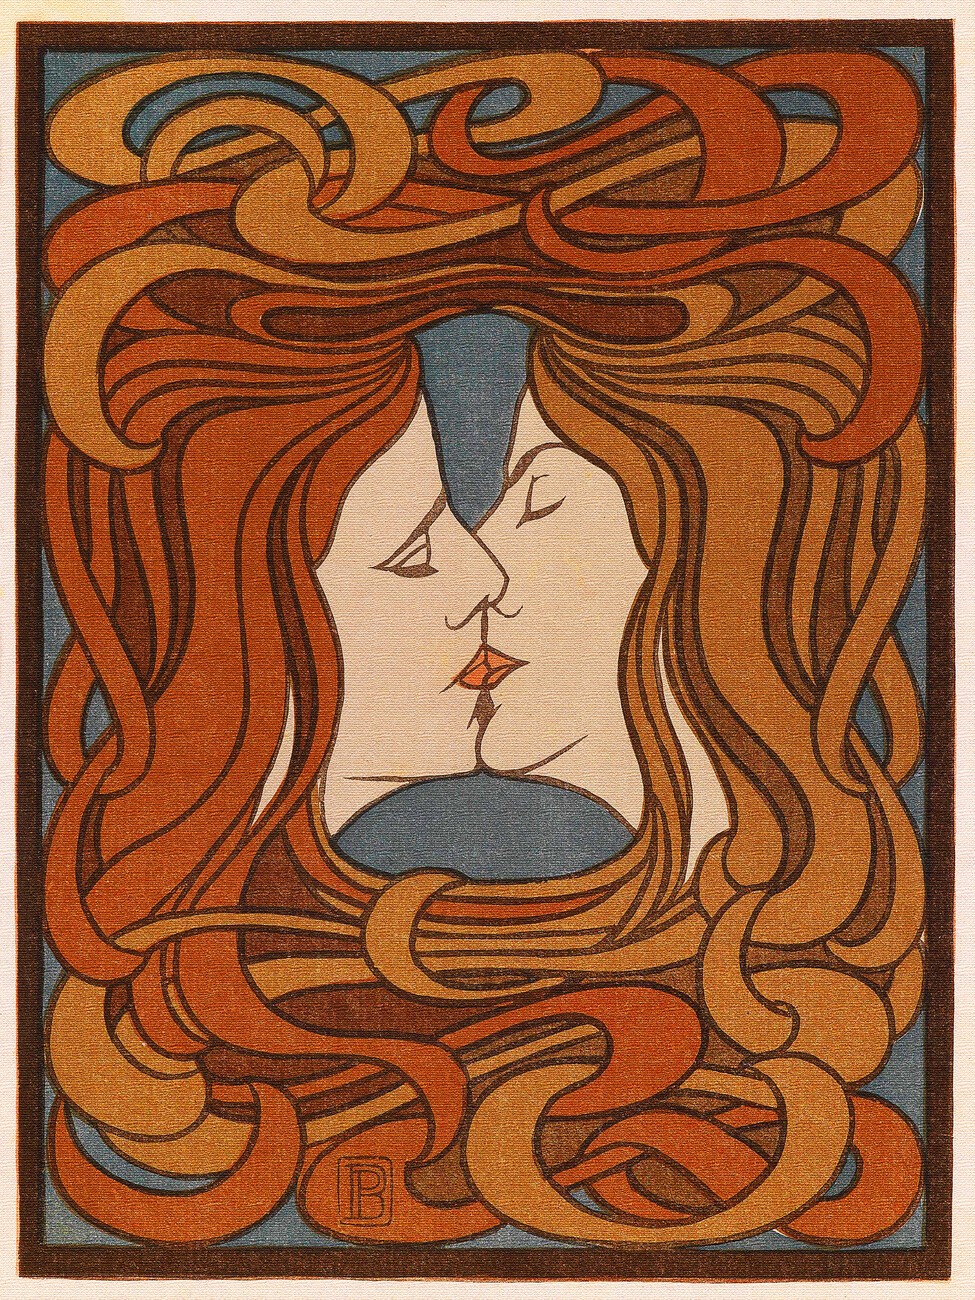 Forkert Skole lærer sund fornuft The Kiss (Vintage Homoerotic Art Nouveau / Lesbian Interest Gay Romance  Poster) - Peter Behrens | Reproductions of famous paintings for your wall